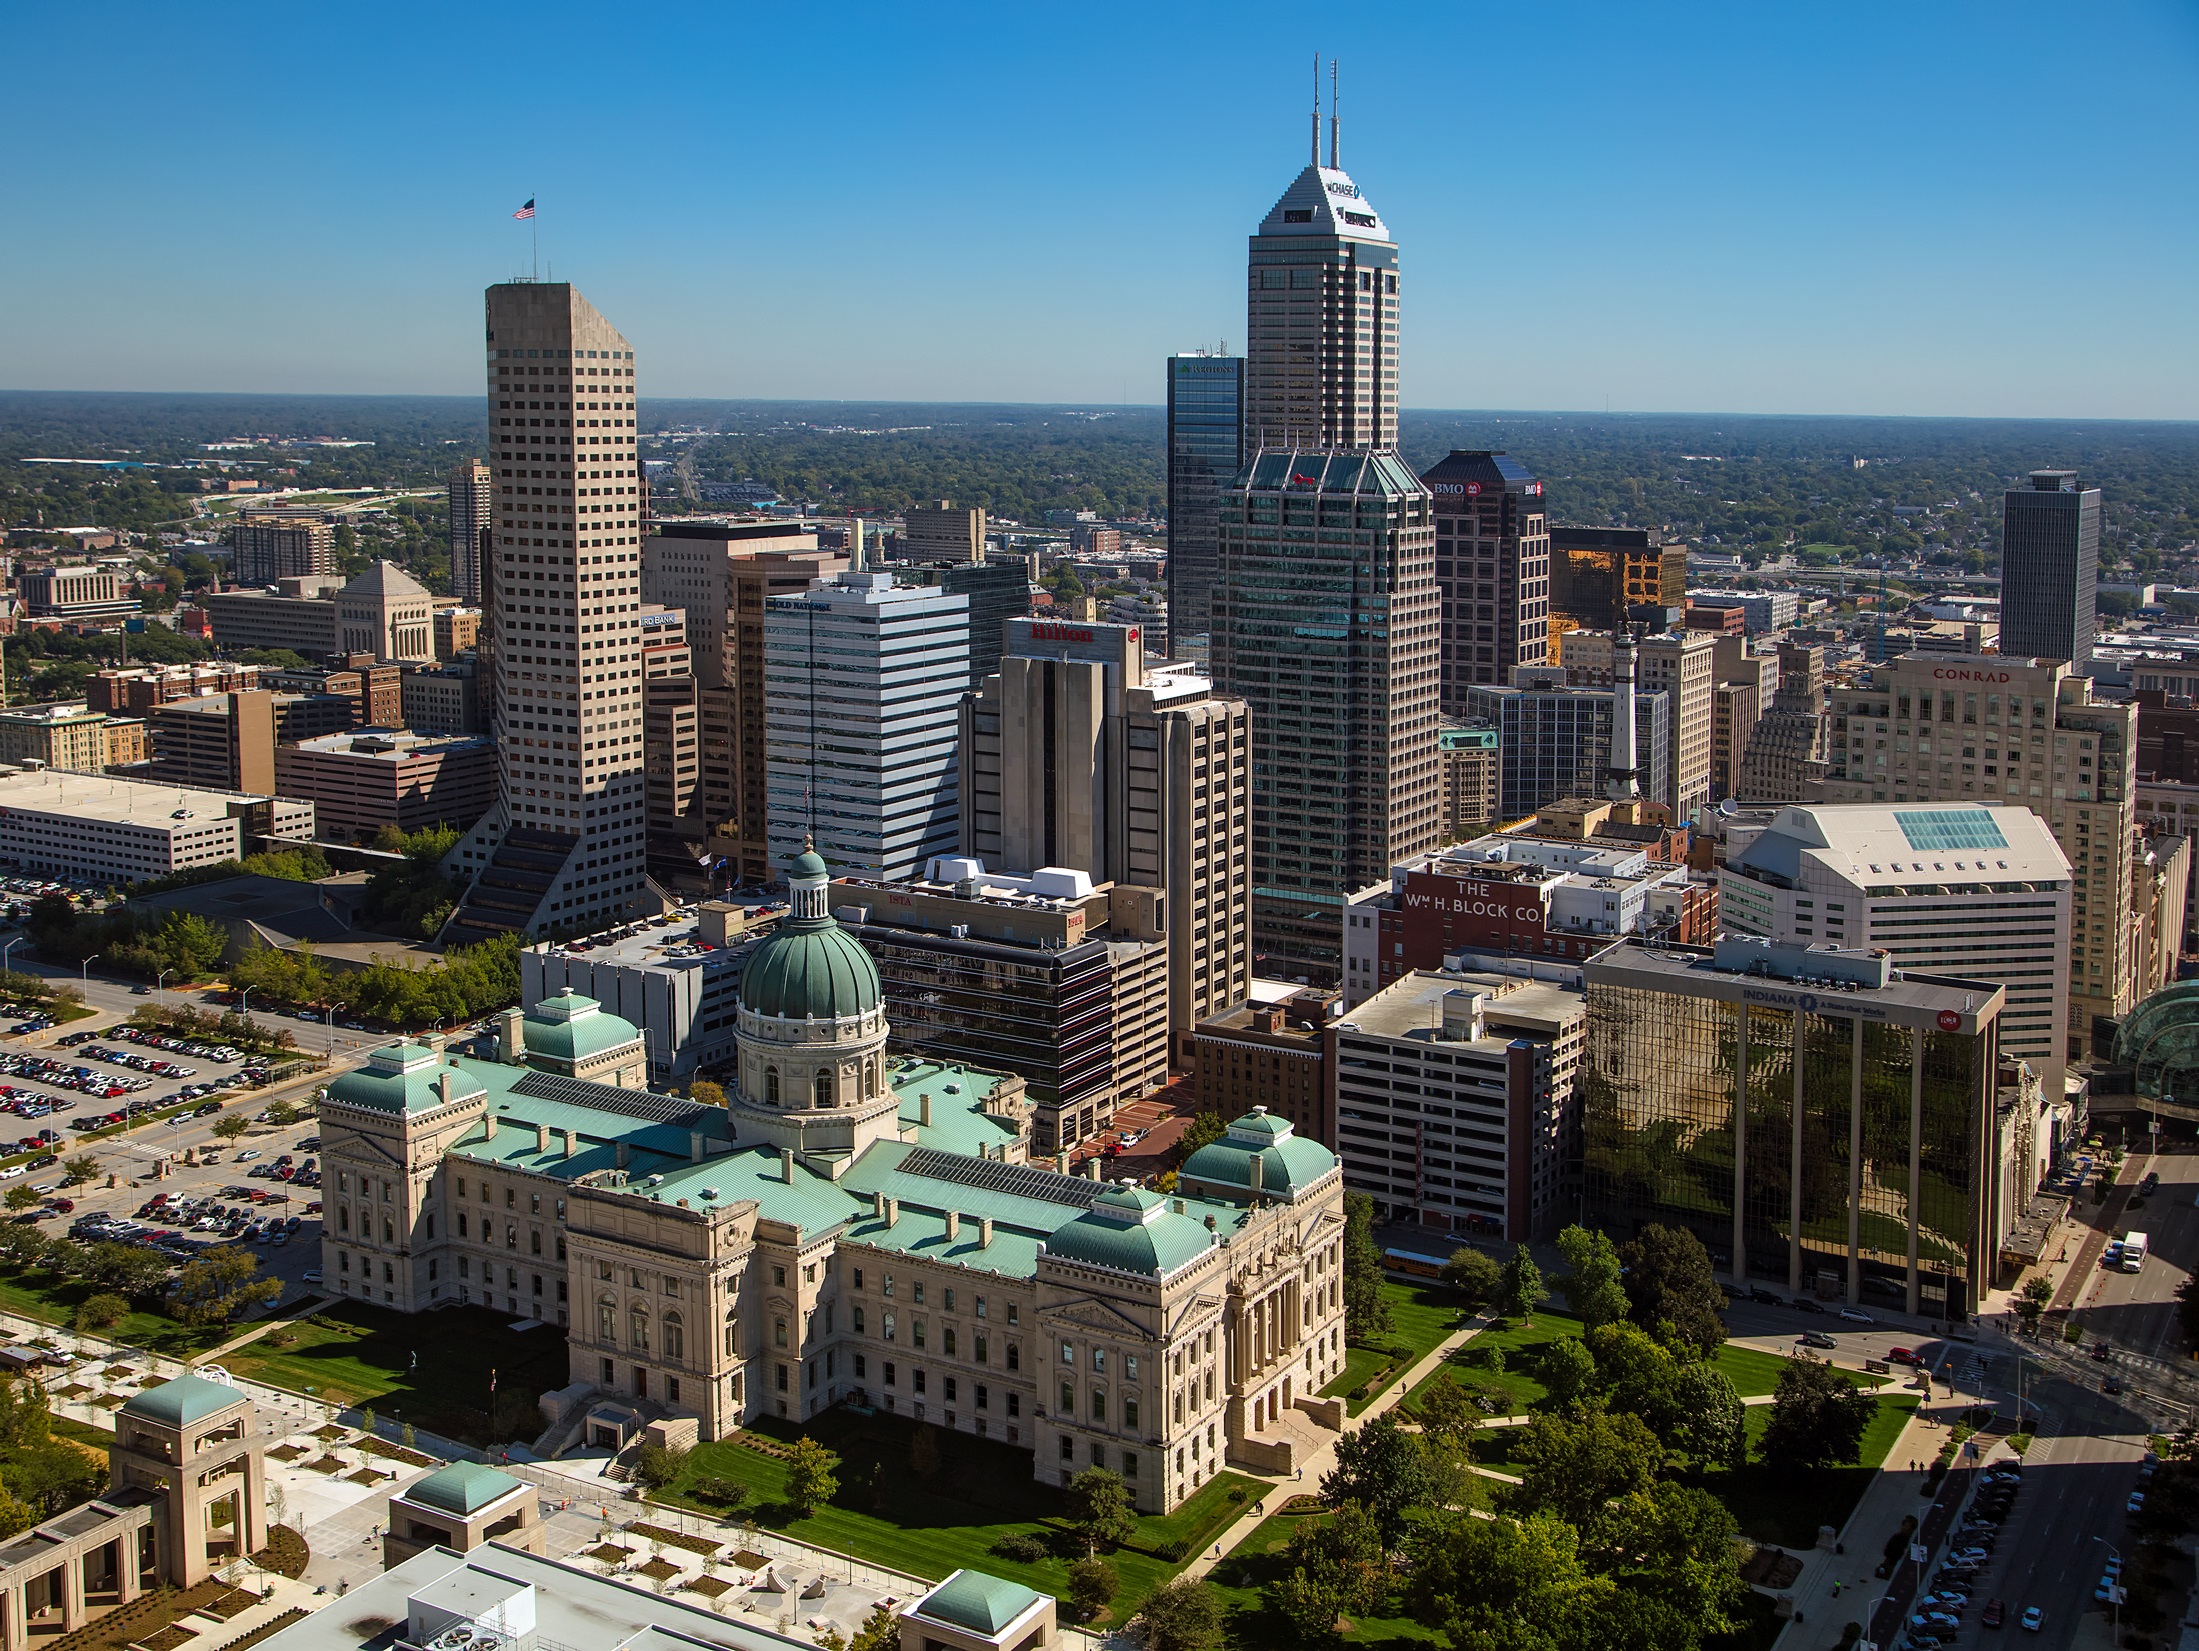 Indianapolis ( IN-dee-ə-NAP-ə-lis), colloquially known as Indy, is the capital and most populous city of the U.S. state of Indiana and the seat of Marion County. Located in Central Indiana, the city lies along the White River's West Fork near its confluence with Fall Creek.
At the 2020 census, the balance population was 887,642. Indianapolis is the 16th-most populous city in the U.S., the third-most populous city in the Midwest after Chicago and Columbus, Ohio, and the fourth-most populous state capital after Phoenix, Arizona, Austin, Texas, and Columbus. The Indianapolis metropolitan area is the 34th-most populous metropolitan statistical area in the U.S., home to 2.1 million residents. With a population of more than 2.6 million, the combined statistical area ranks 27th. Indianapolis proper covers 368 square miles (950 km2), making it the 18th-most extensive city by land area in the country.
Indigenous peoples inhabited the area dating to as early as 10,000 BC. In 1818, the Lenape relinquished their tribal lands in the Treaty of St. Mary's. In 1821, Indianapolis was founded as a planned city for the new seat of Indiana's state government. The city was platted by Alexander Ralston and Elias Pym Fordham on a 1-square-mile (2.6 km2) grid. Completion of the National and Michigan roads and the arrival of rail later solidified the city's position as a manufacturing and transportation hub. Two of the city's nicknames, the "Crossroads of America" and "Railroad City", reflect the city's historical ties to transportation. Since the 1970 city-county consolidation, known as Unigov, local government administration operates under the direction of an elected 25-member city-county council headed by the mayor.
Indianapolis anchors the 30th largest metropolitan economy in the U.S., based primarily on the industries of trade, transportation, and utilities; professional and business services; education and health services; government; leisure and hospitality; and manufacturing. The city has notable niche markets in amateur sports and auto racing. Indianapolis is home to three Fortune 500 companies, two major league sports teams (the Colts of the NFL and the Pacers of the NBA), five university campuses, and several museums, including the world's largest children's museum. The city is perhaps best known for annually hosting the world's largest single-day sporting event, the Indianapolis 500. Among the city's historic sites and districts, Indianapolis is home to the largest collection of monuments dedicated to veterans and war casualties in the U.S. outside of Washington, D.C.